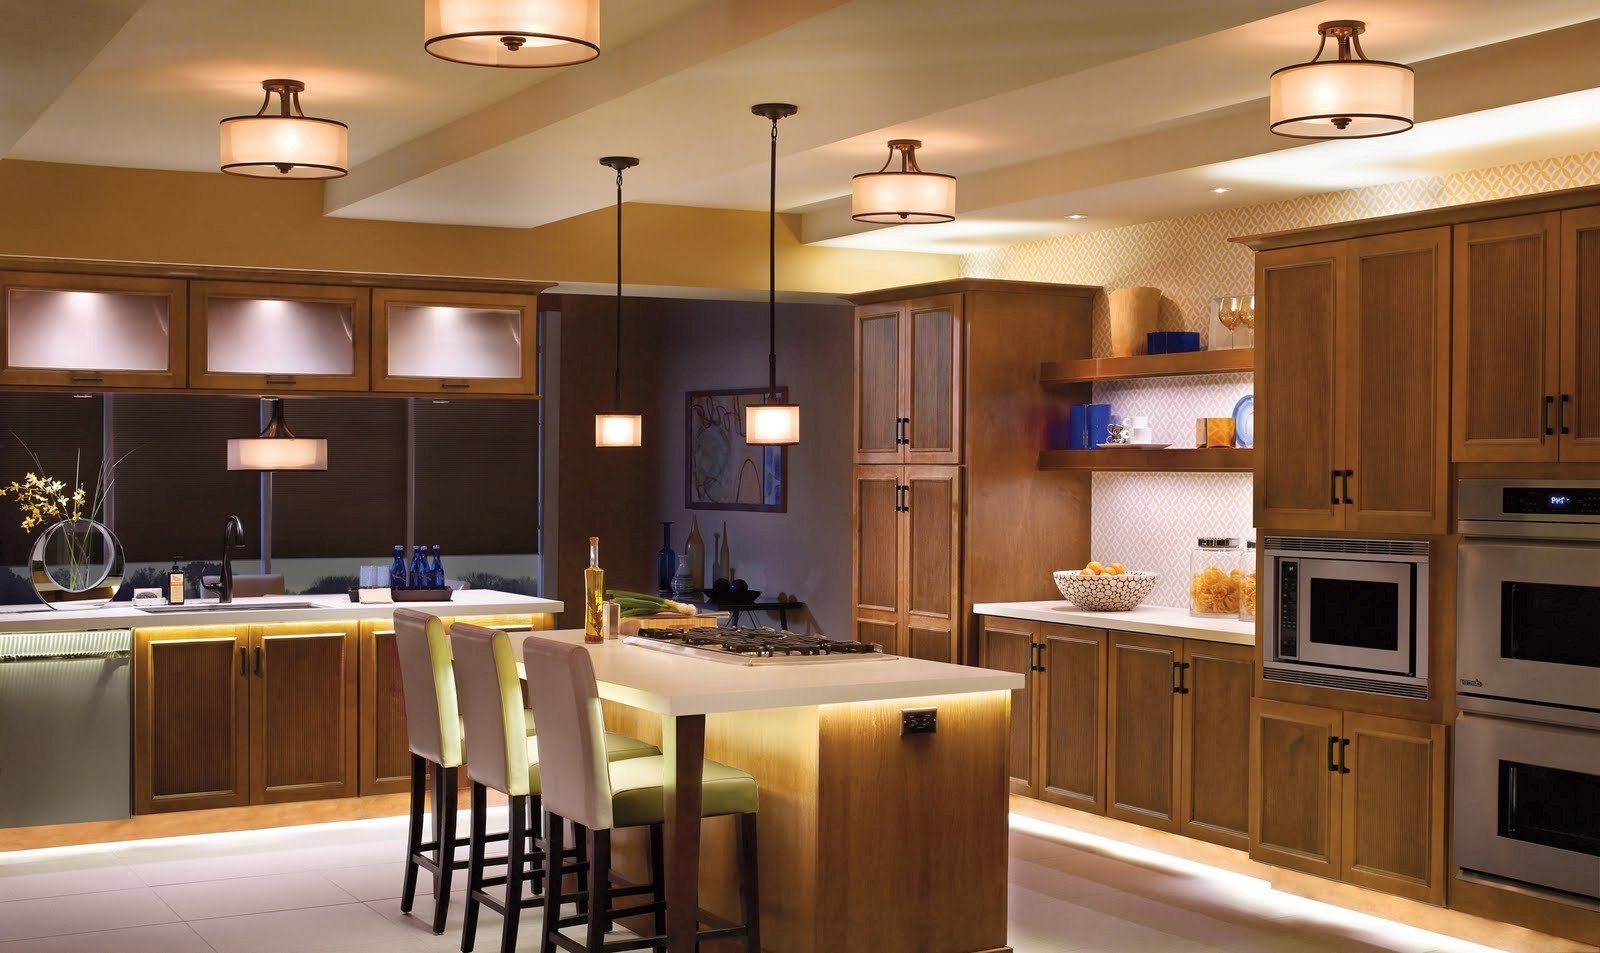 Permalink to Led Lighting For Kitchen Ceilings